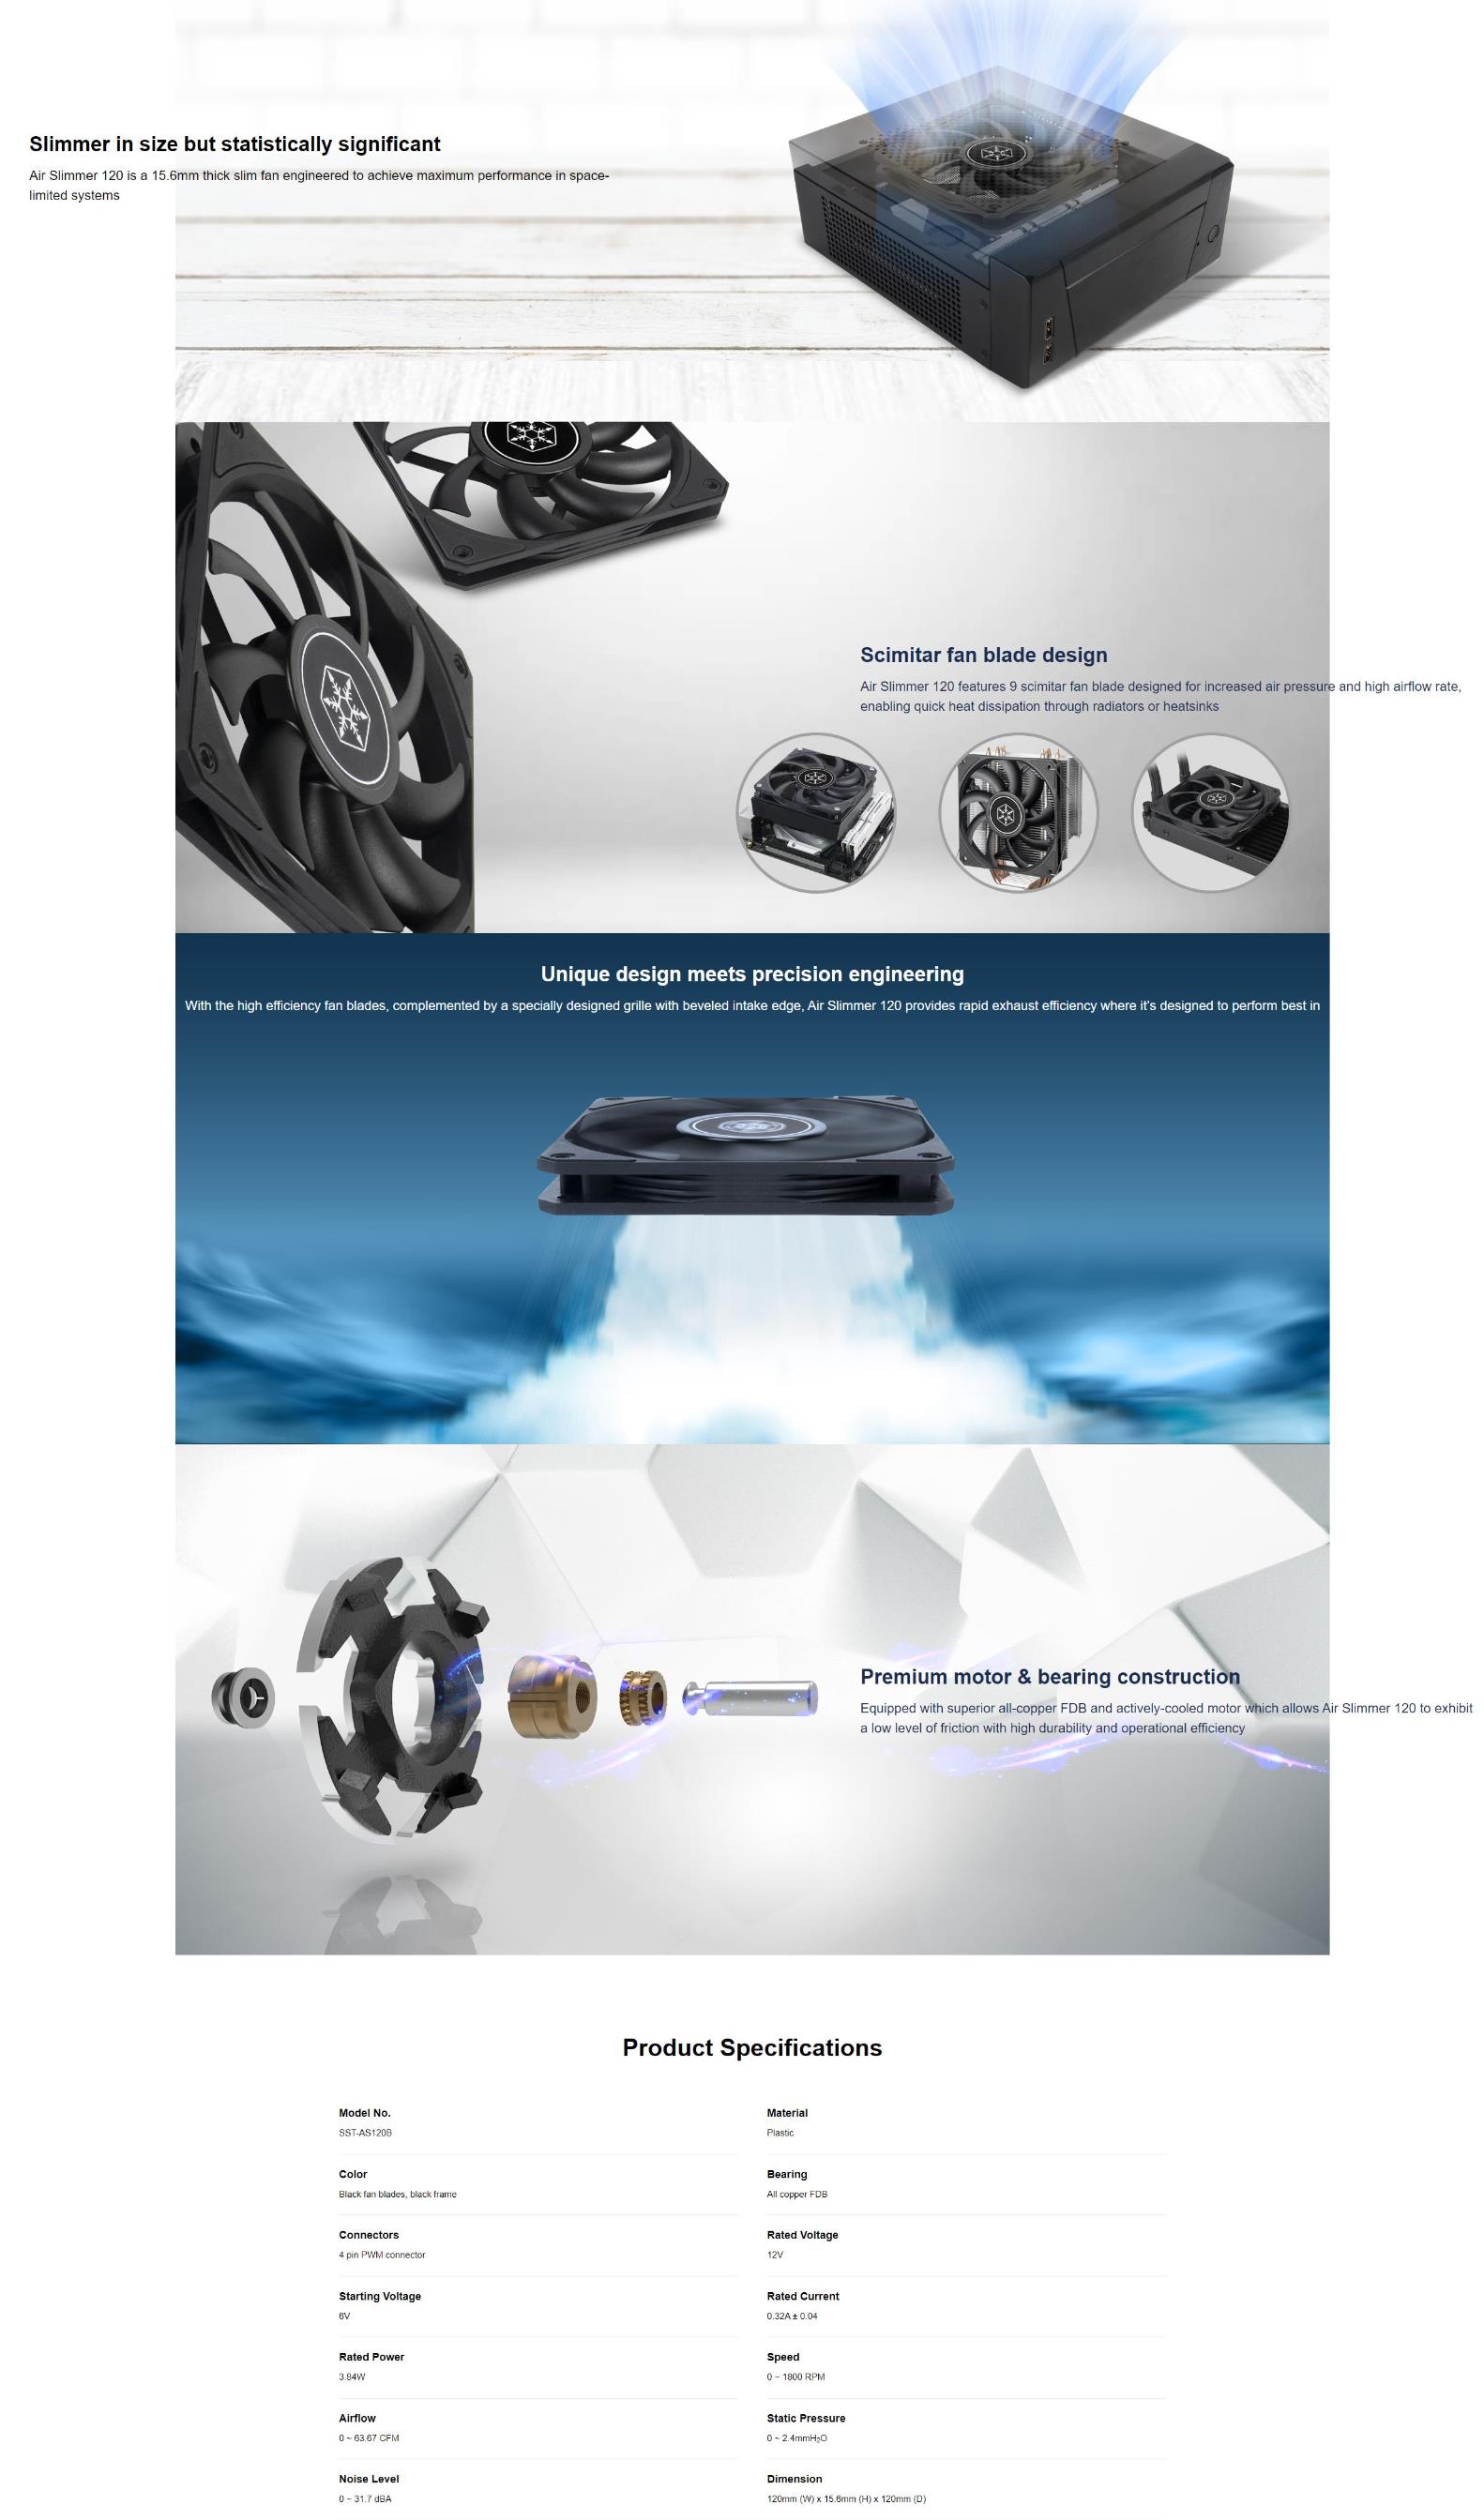 A large marketing image providing additional information about the product Silverstone Air Slimmer 120mm PWM Cooling Fan - Additional alt info not provided